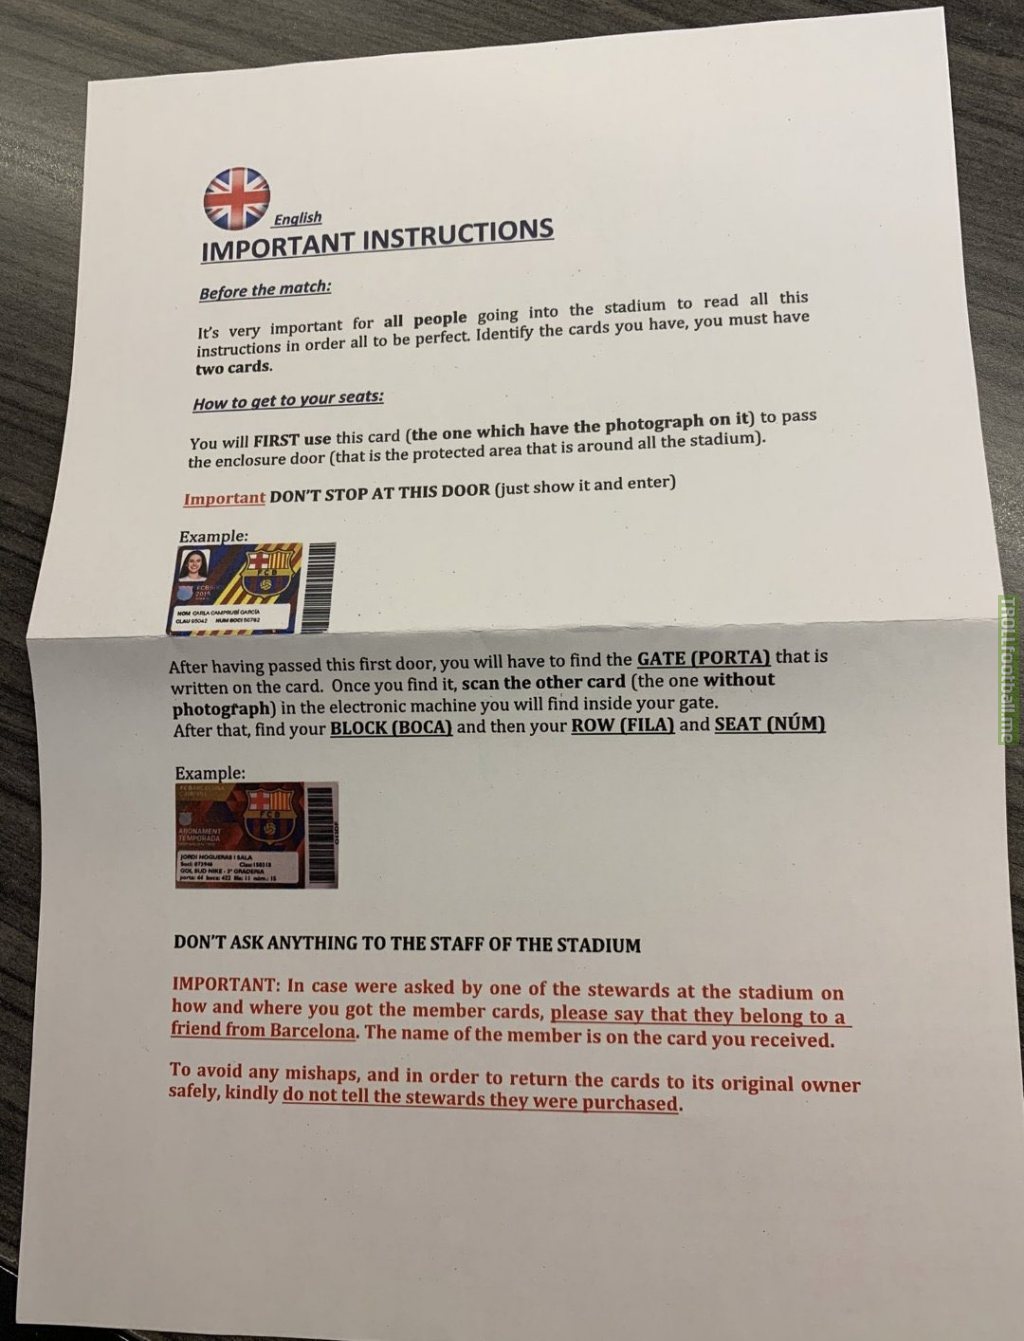 It seems that some socios have an ongoing partnership with hotels to sell their match tickets. This paper shows important instructions, and was obtainable in one of the hotels. [@LordbzB]